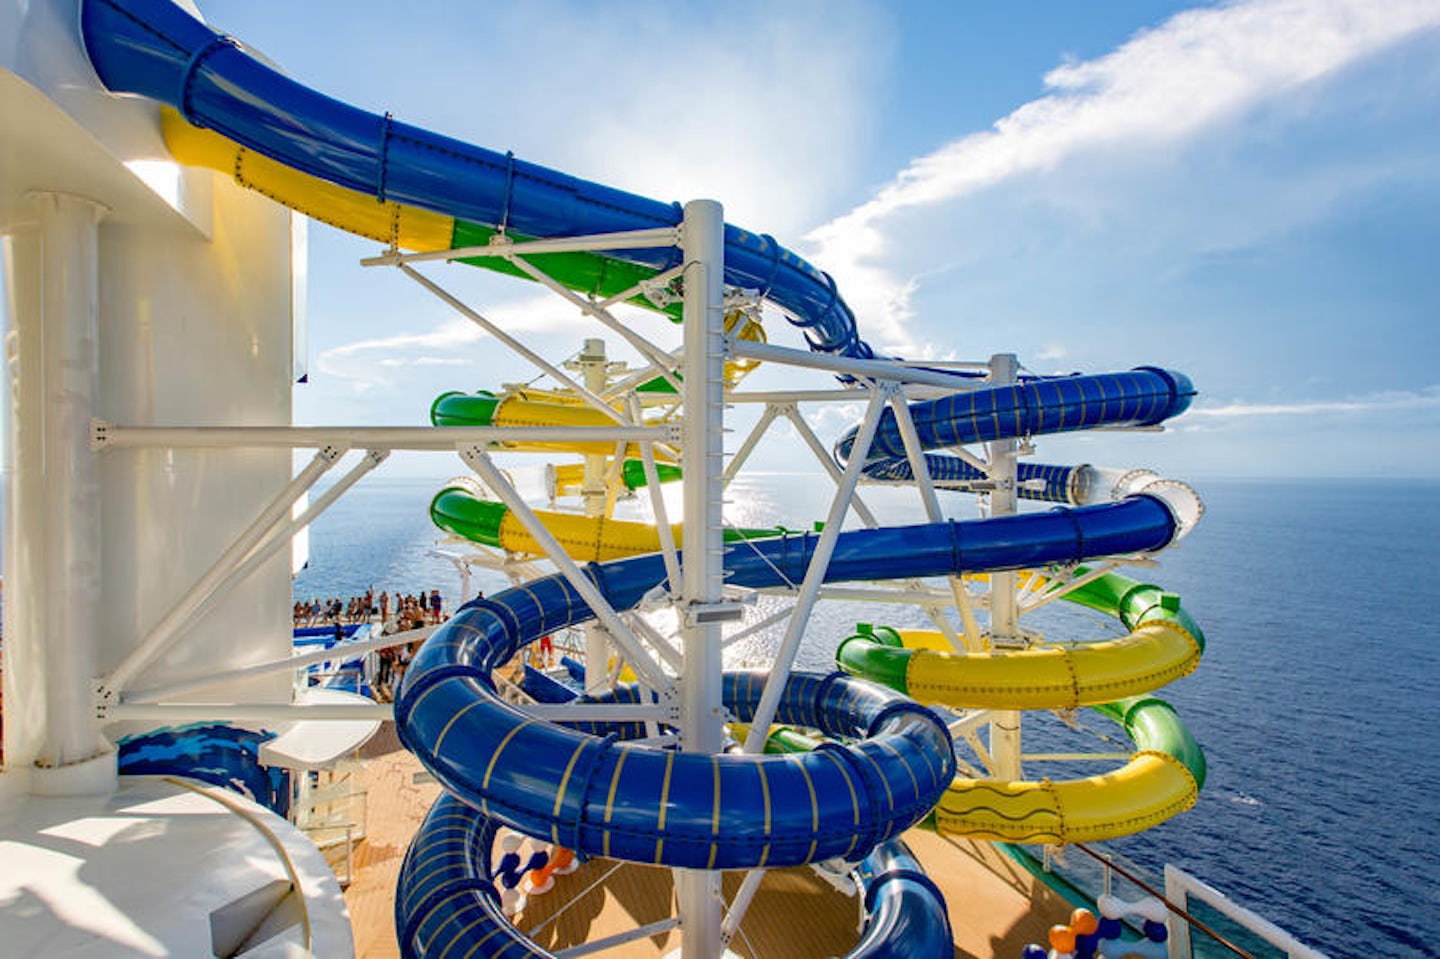 The Perfect Storm on Mariner of the Seas